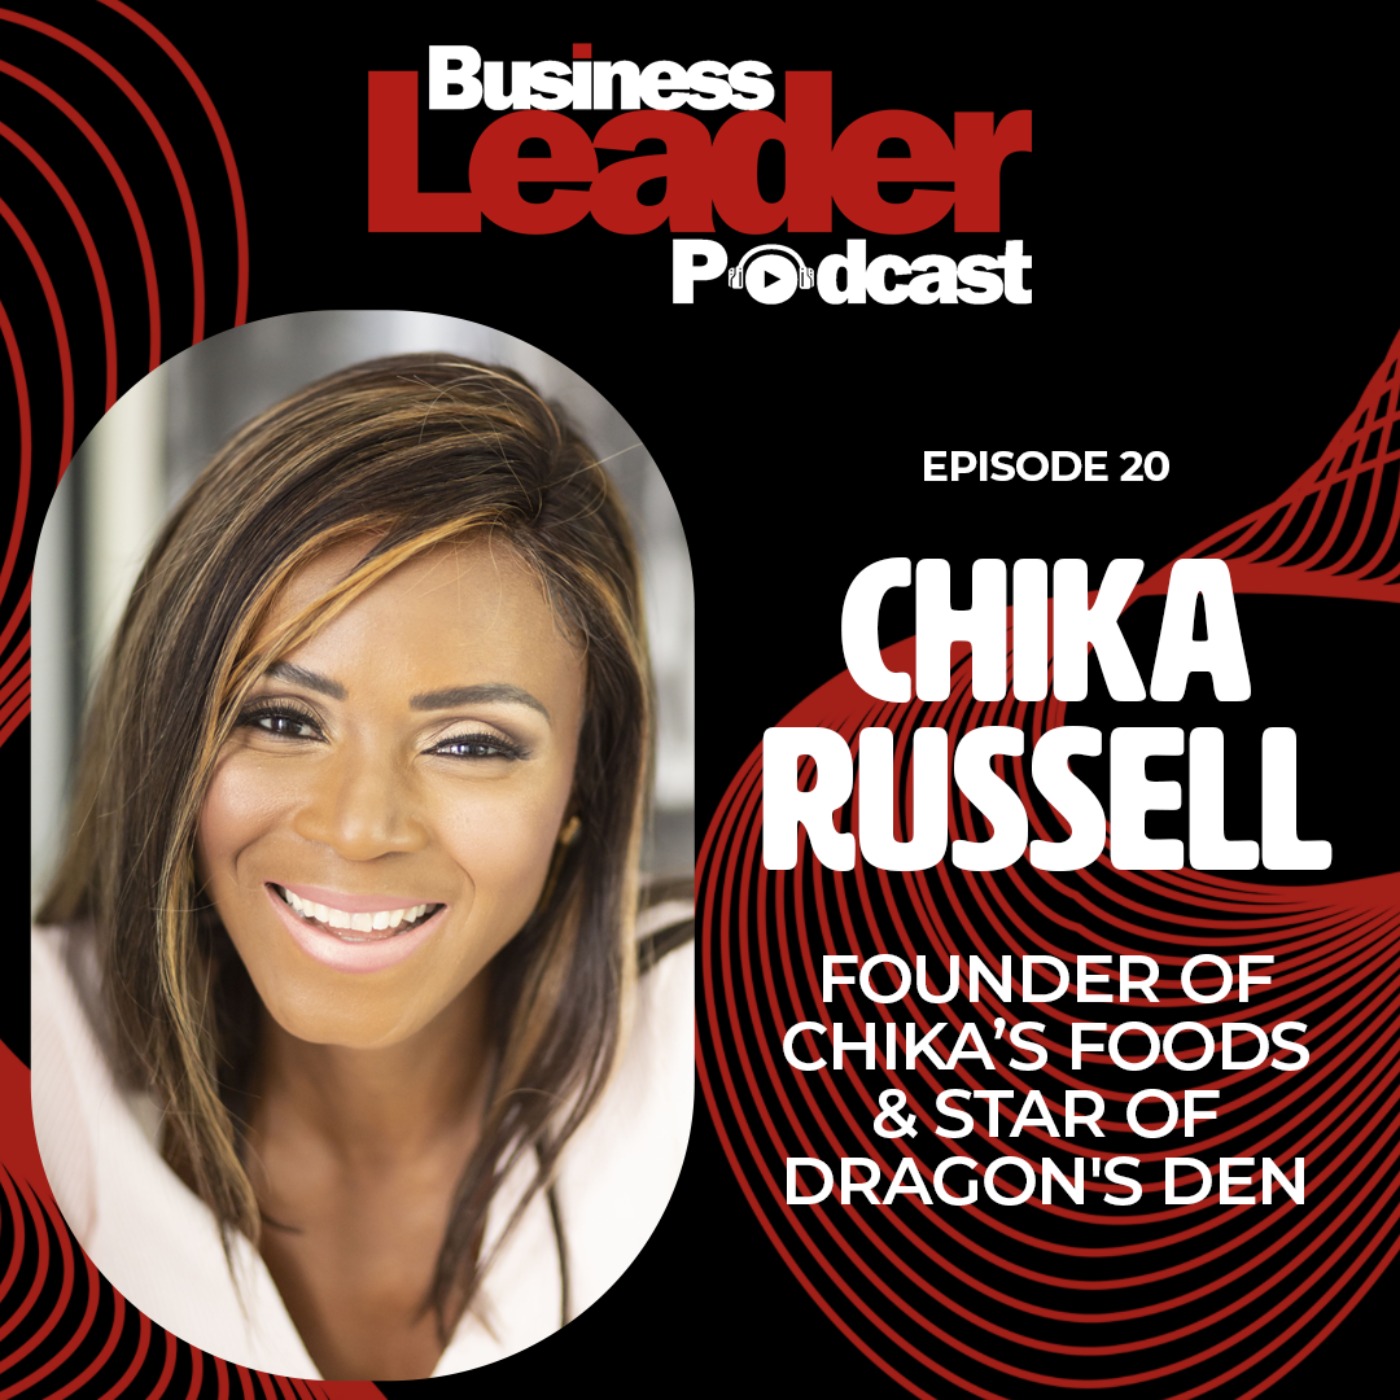 Chika Russell: founder of CHIKA’S Foods and star of Dragon's Den